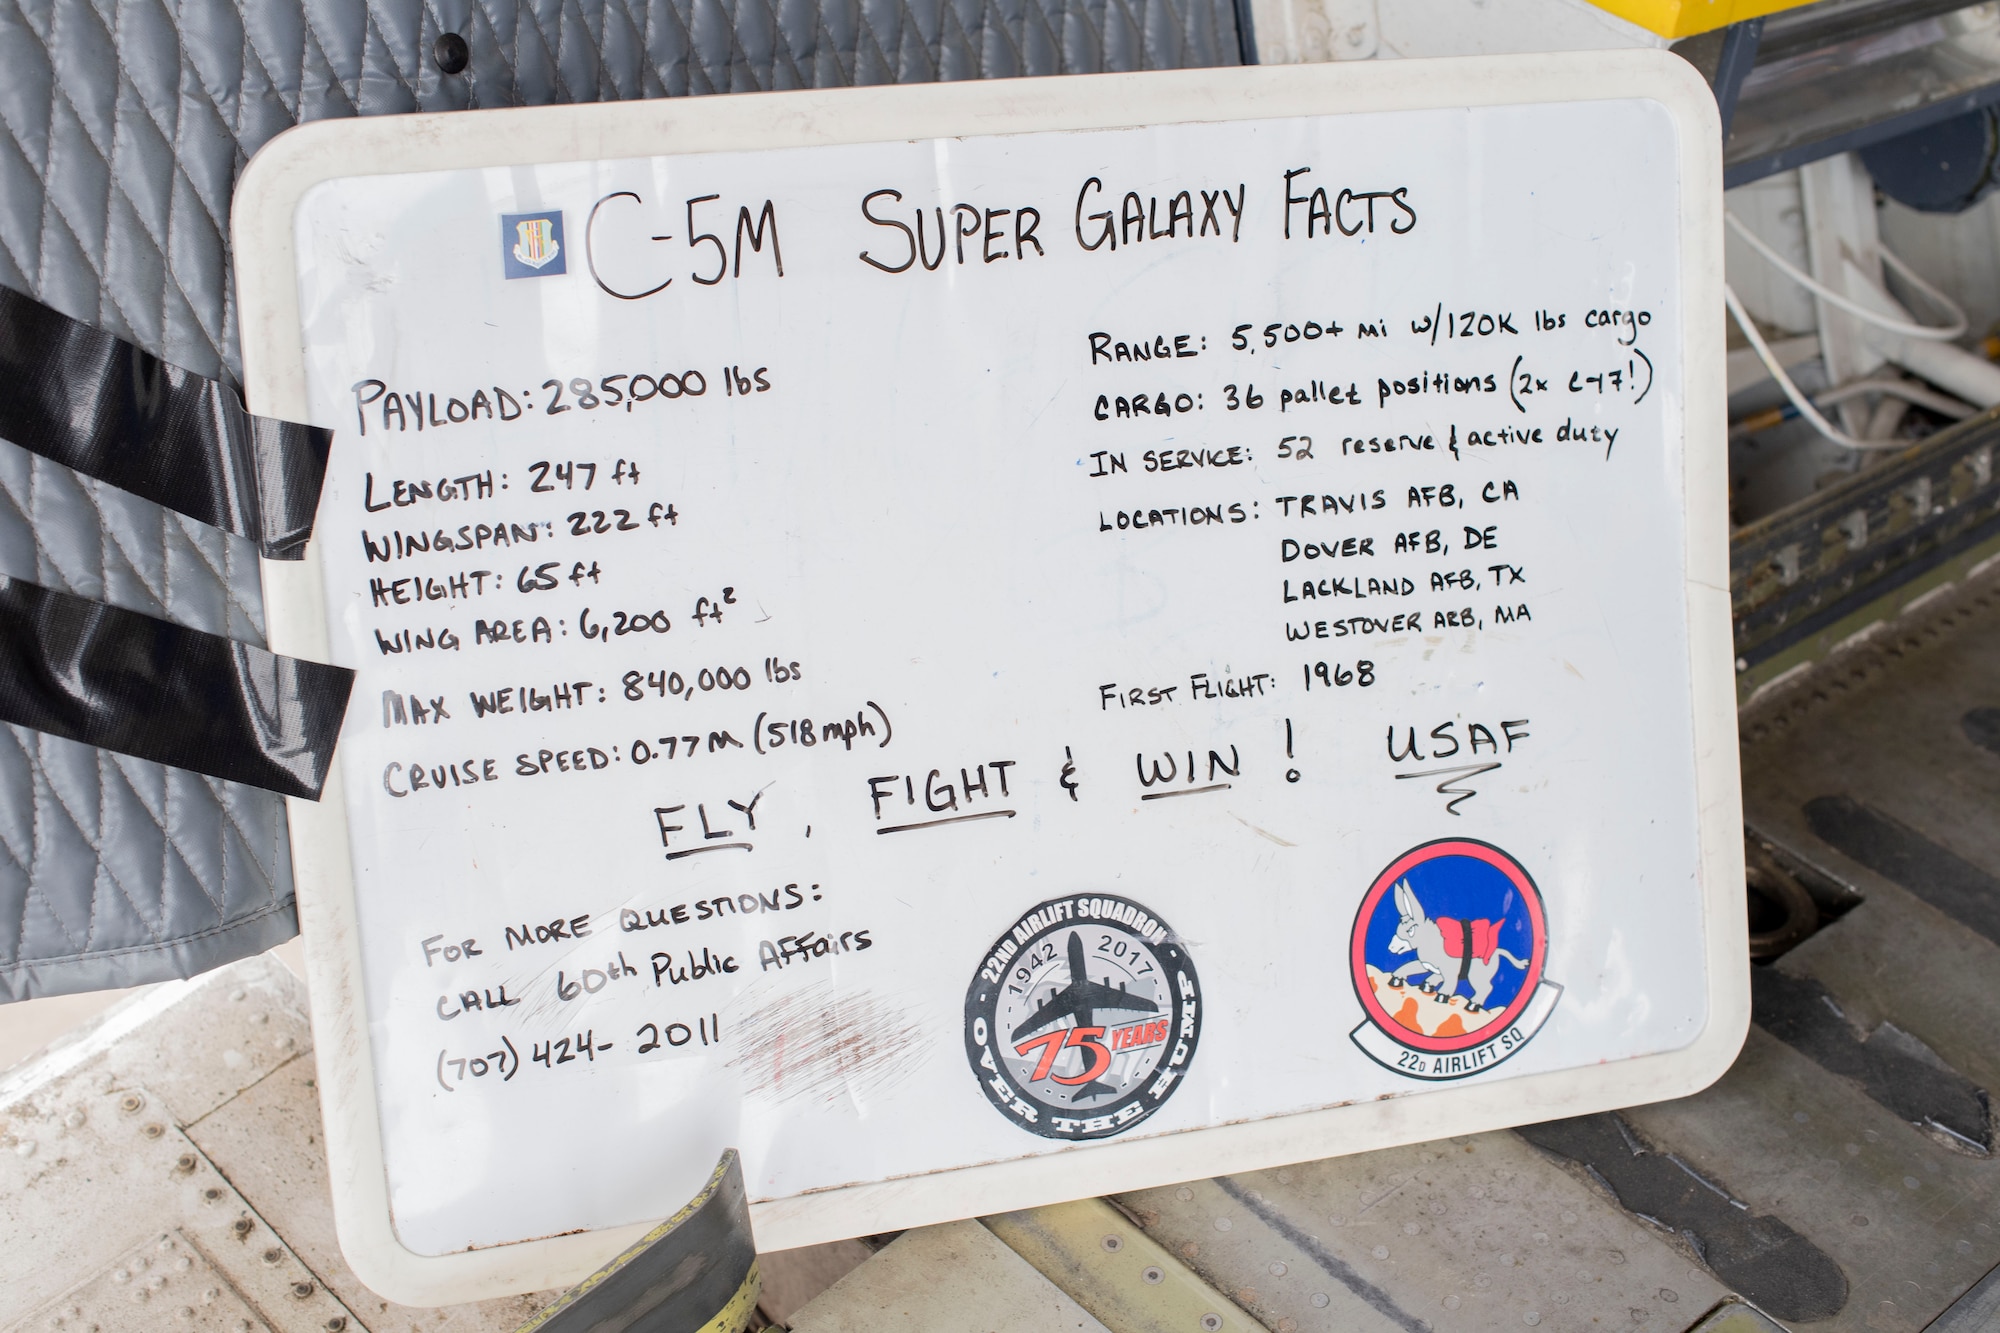 An information board about the C-5M Super Galaxy sits displayed inside the aircraft July 26, 2019, at Whitman Regional Airport in Oshkosh, Wisconsin. The C-5 crew went to EAA AirVenture 2019 where more than 500,000 aviation enthusiasts from 80 countries gathered at the air show to celebrate the past, present and future in the world of aviation. (U.S. Air Force photo by Senior Airman Jonathon Carnell)